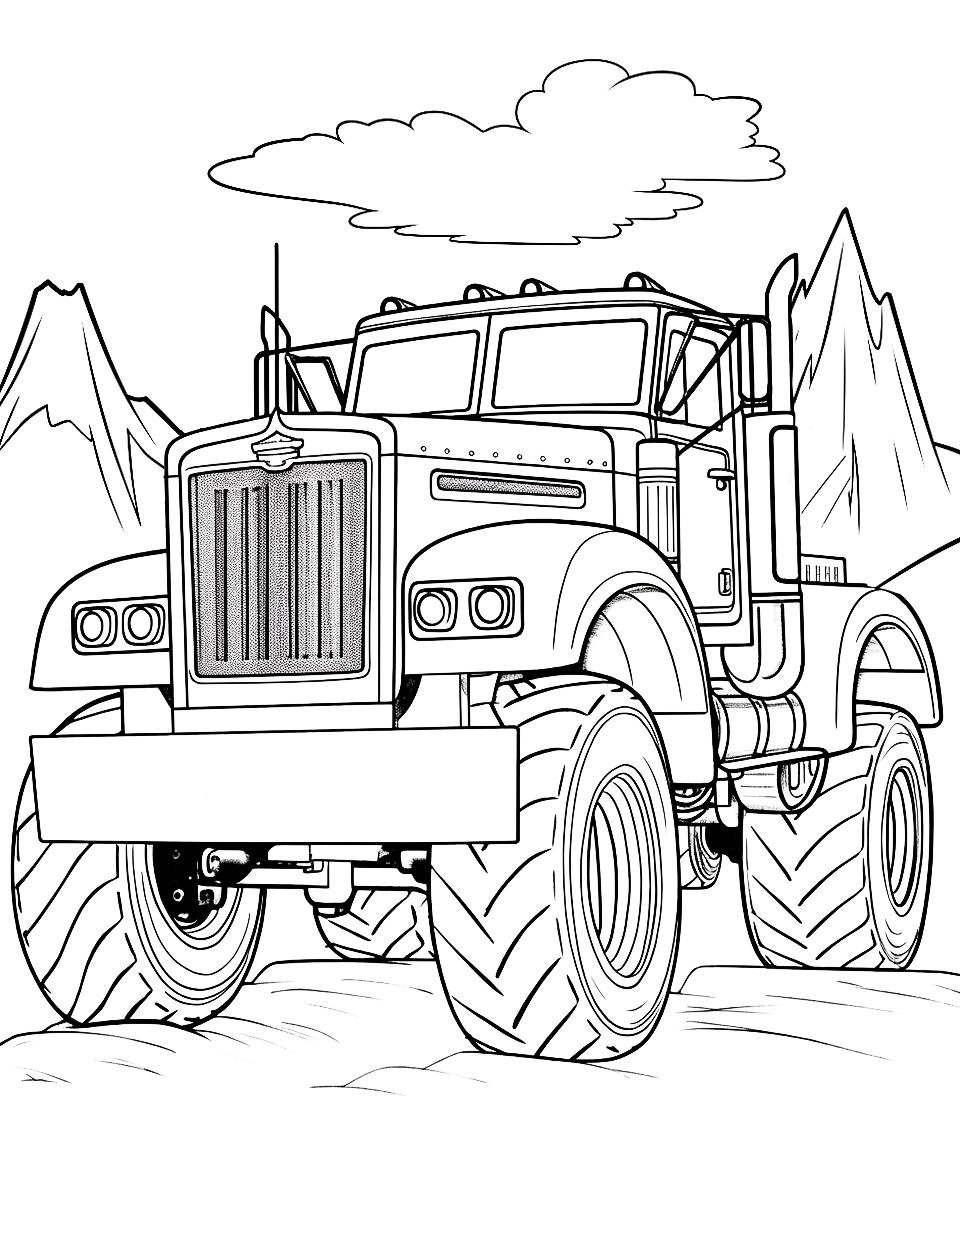 Realistic Big Rigs Monster Truck Coloring Page - A realistic design of a monster truck, with intricate details for advanced coloring.